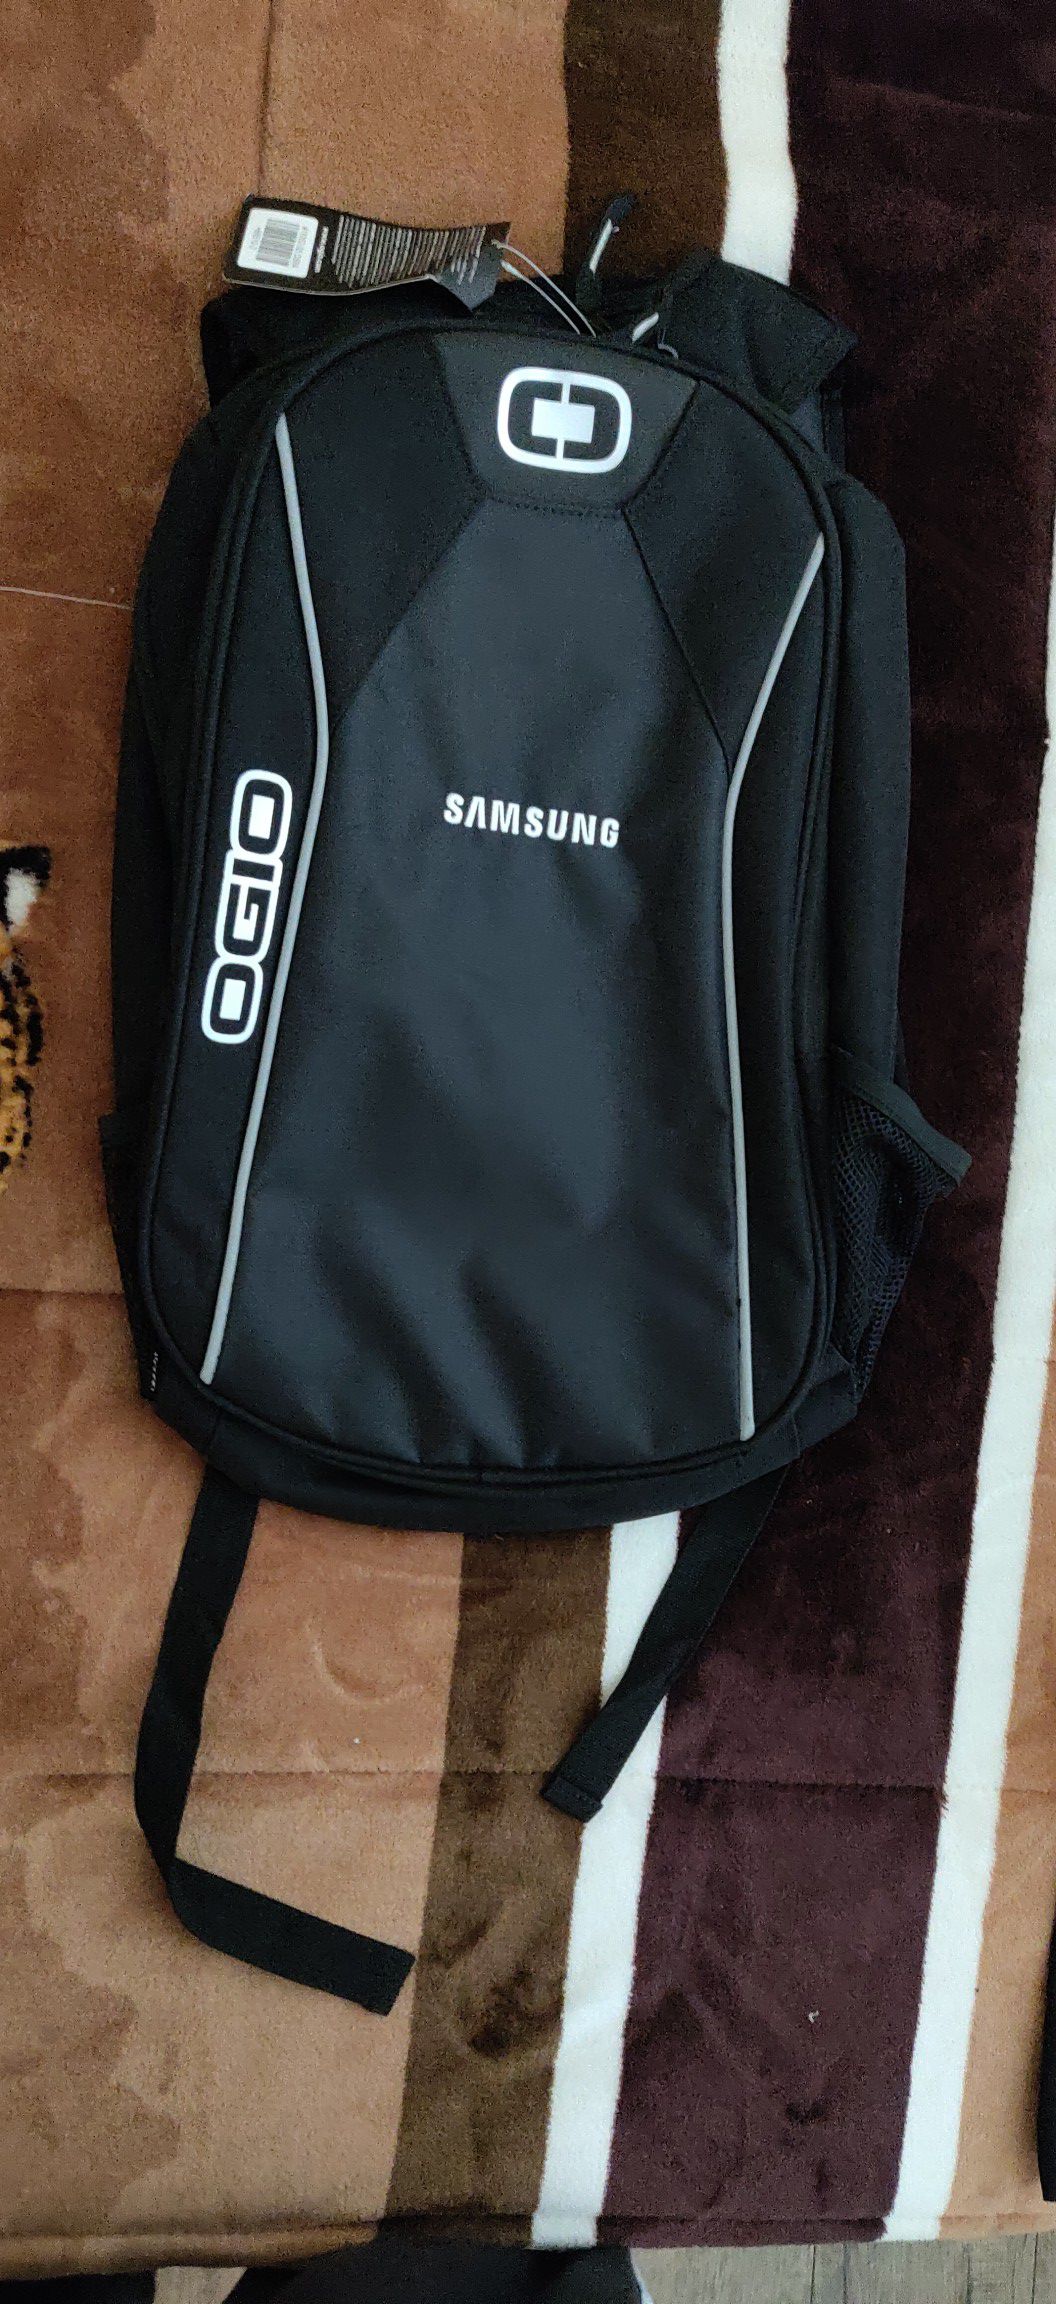 Authentic OGIO backpack Samsung official